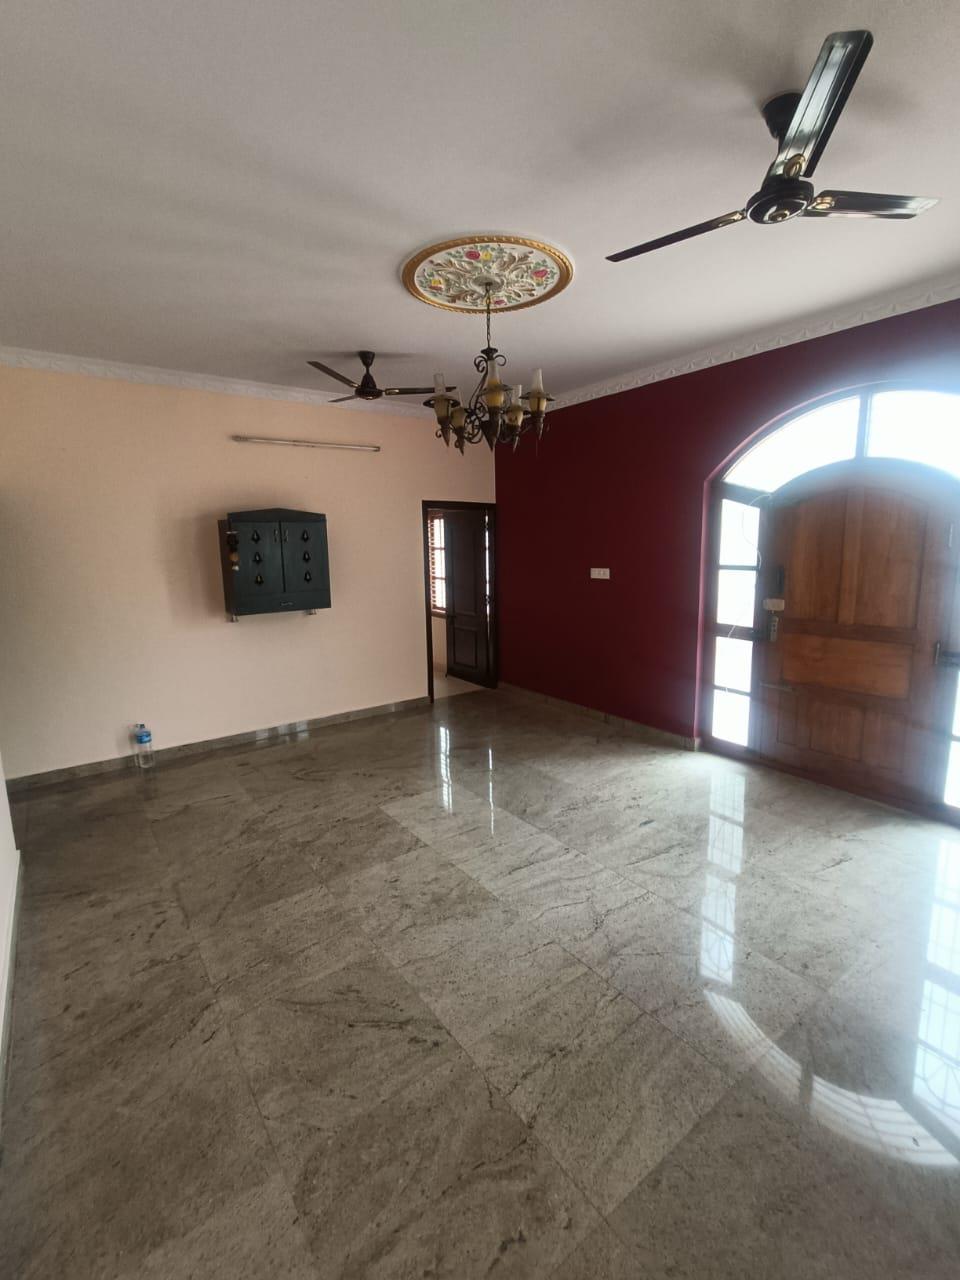 3 BHK Independent House for Lease Only at 28 Lakhs - JAML2 - 150 in Vignana Nagar